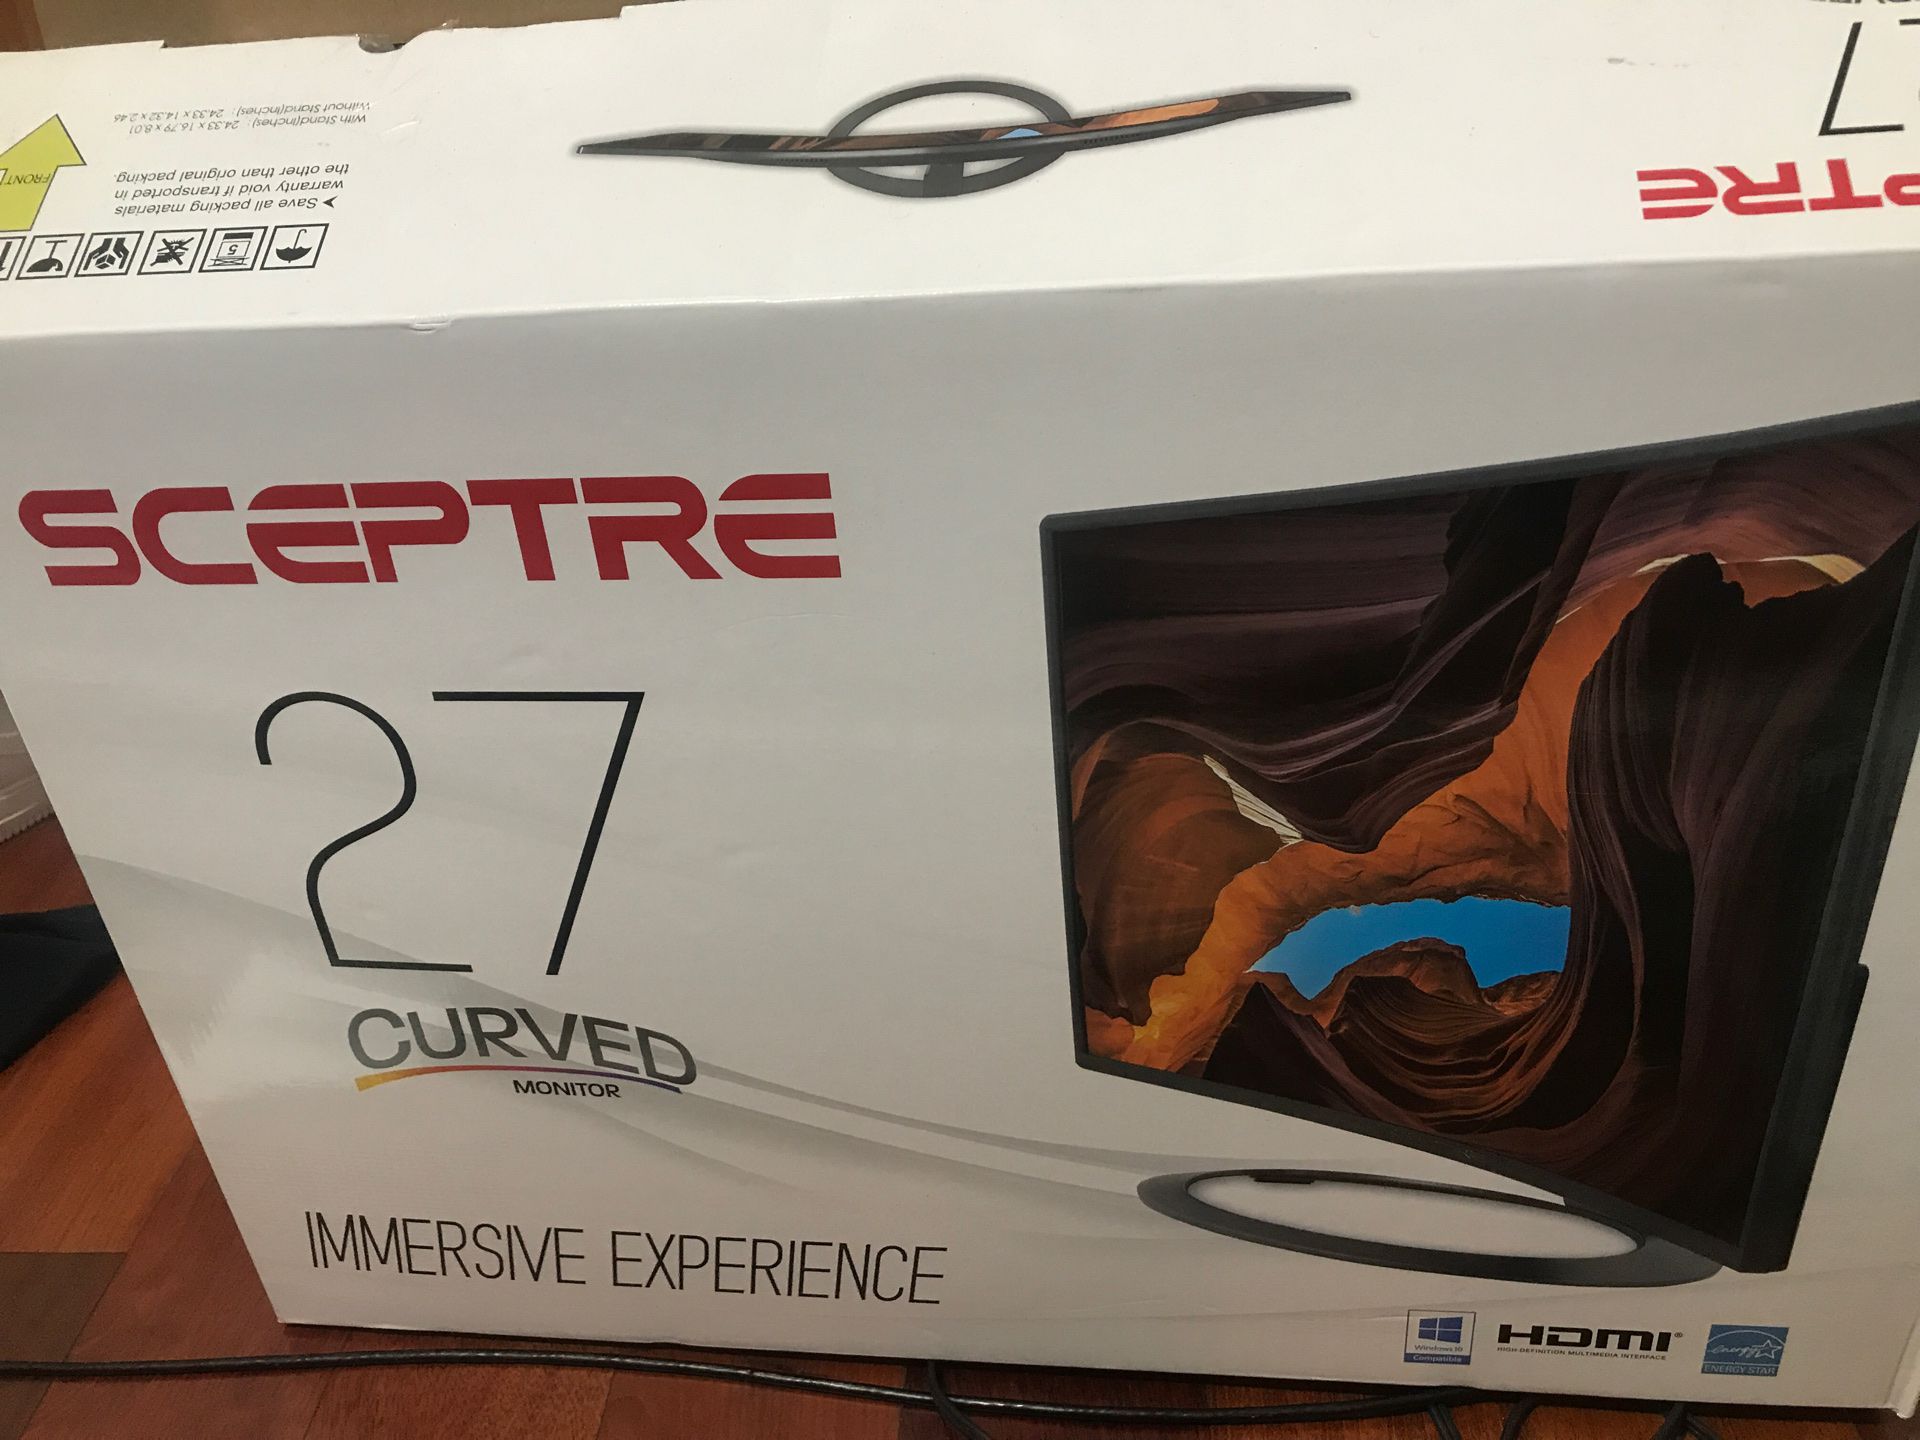 Sceptre ‘27’ Curved Monitor.